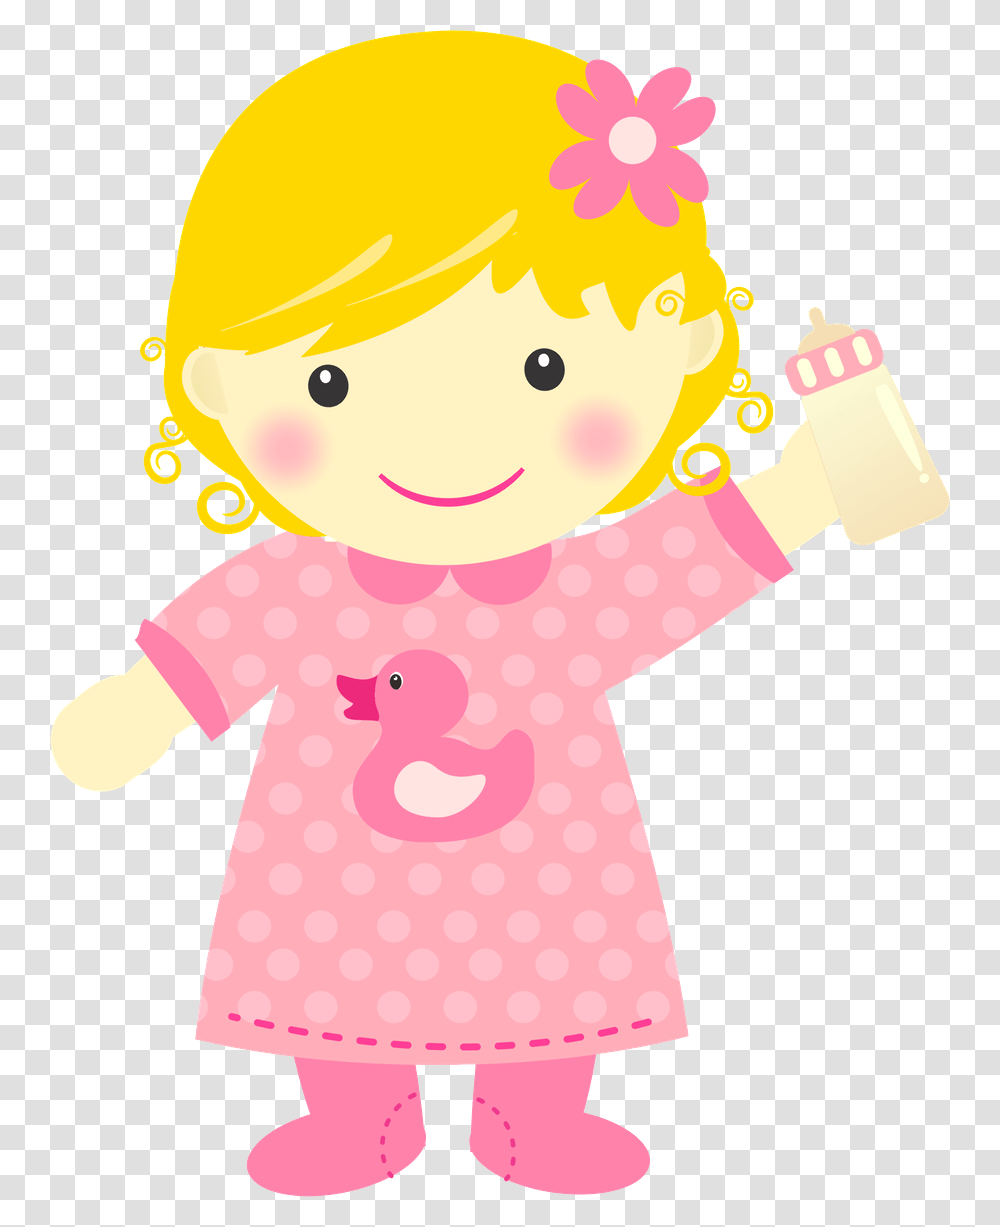 Babi Baby Baby Clip Art Baby Album, Texture, Polka Dot, Toy, Doll Transparent Png